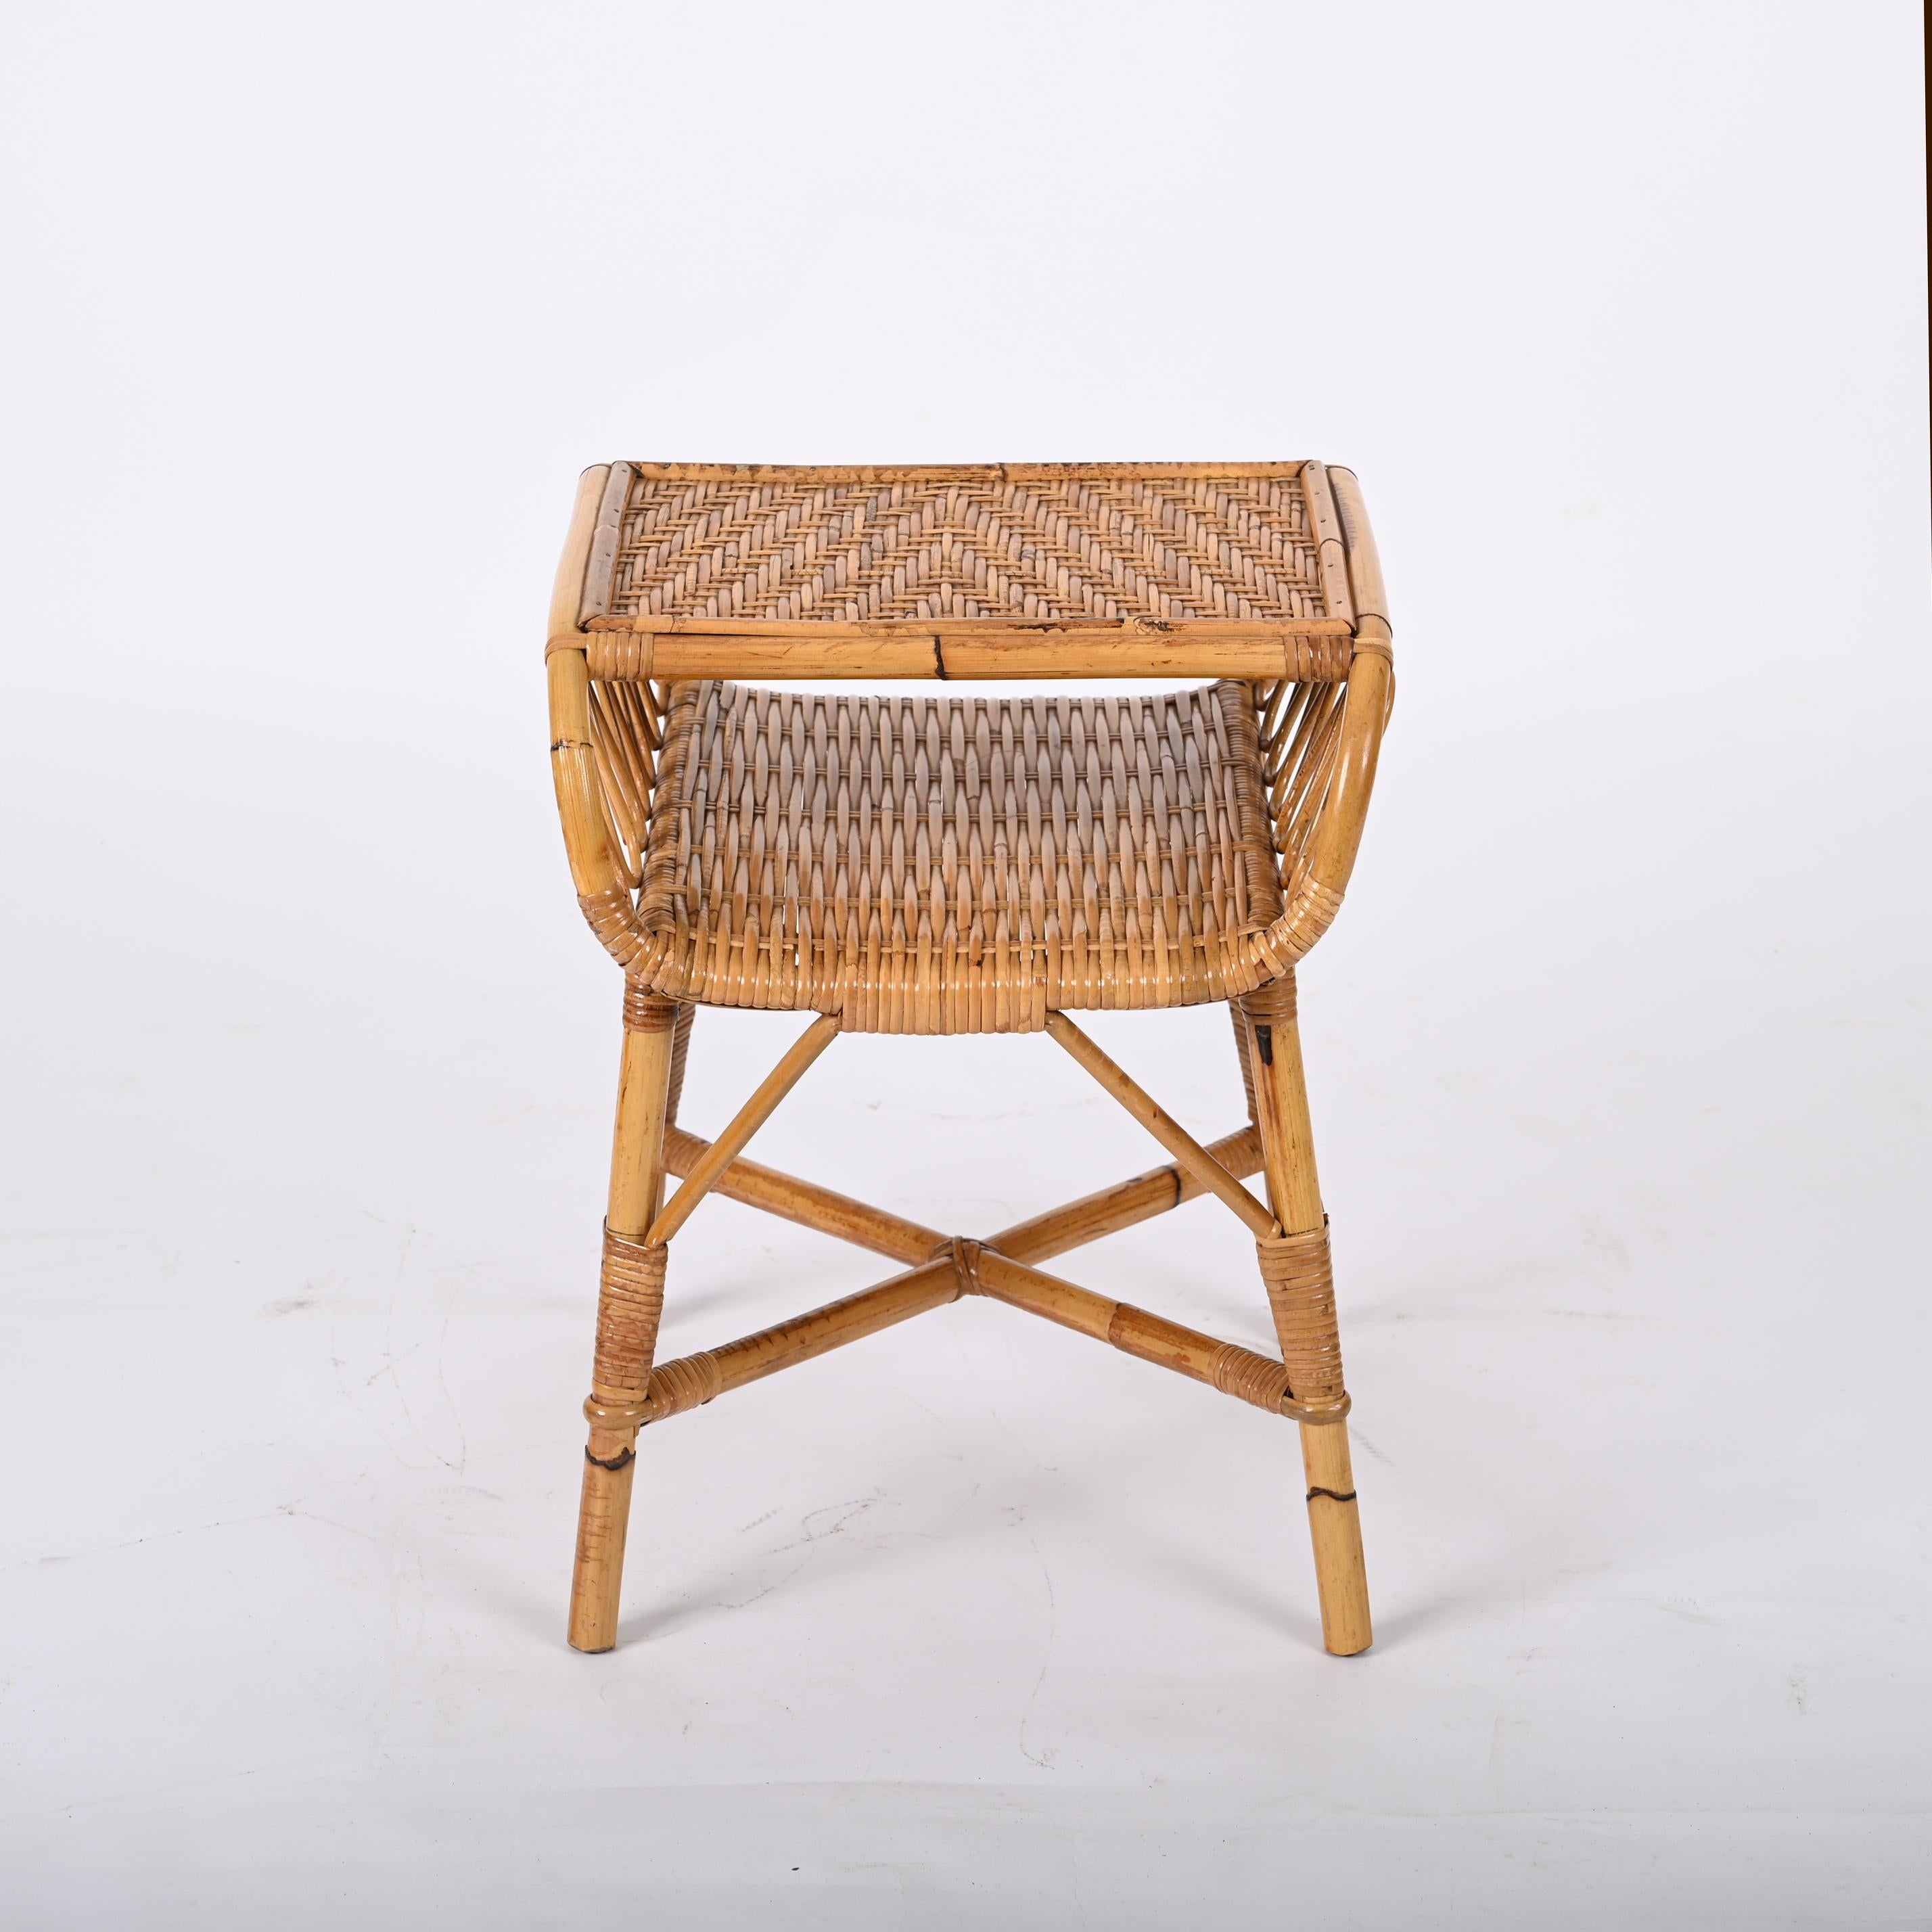 Midcentury Modern Bamboo Rattan and Wood Italian Bedside Table, 1960s 1